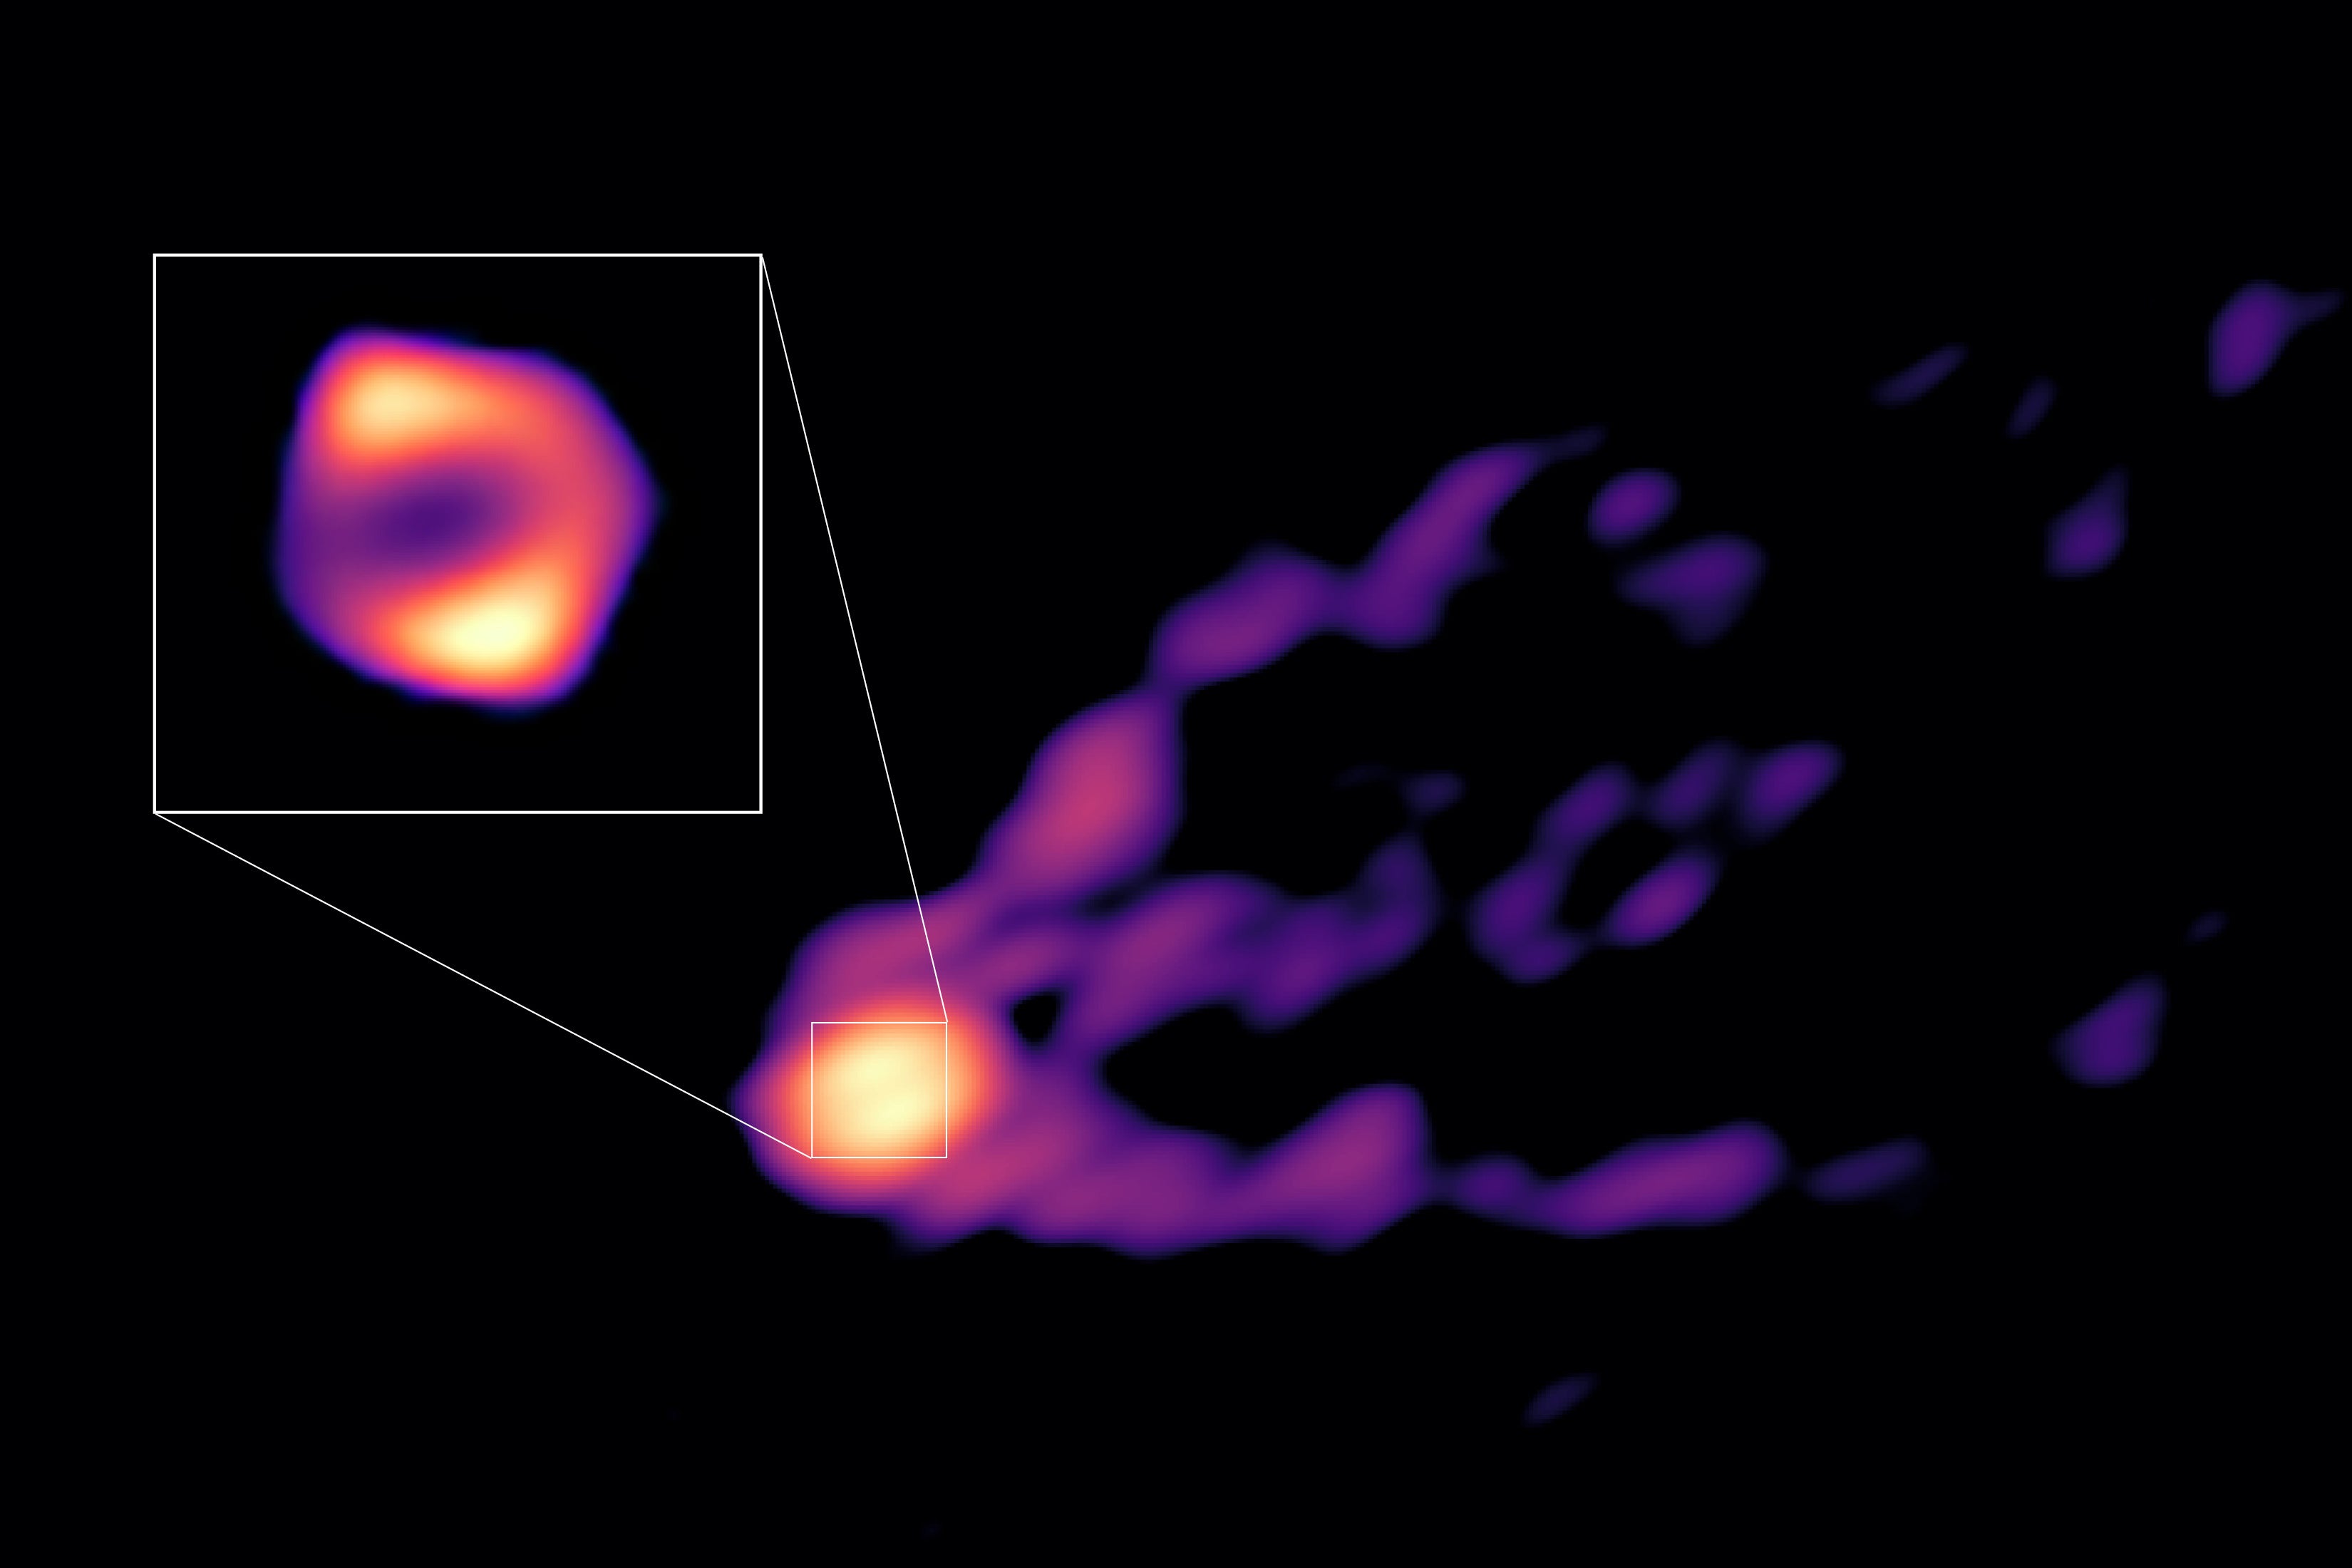 The new image, showing the shadow (inset) and jet of the M87 black hole. (Image: R.-S. Lu (SHAO), E. Ros (MPIfR), S. Dagnello (NRAO/AUI/NSF))